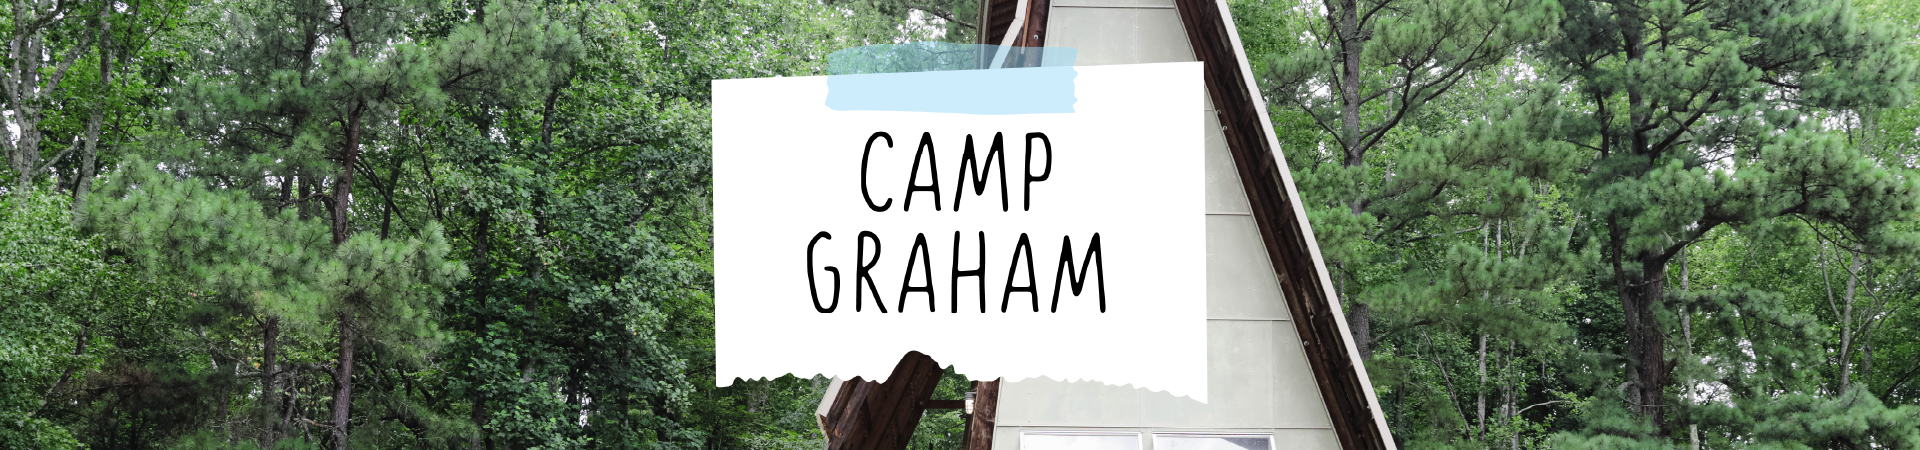  outdoor area near lake with Camp Graham graphic text 